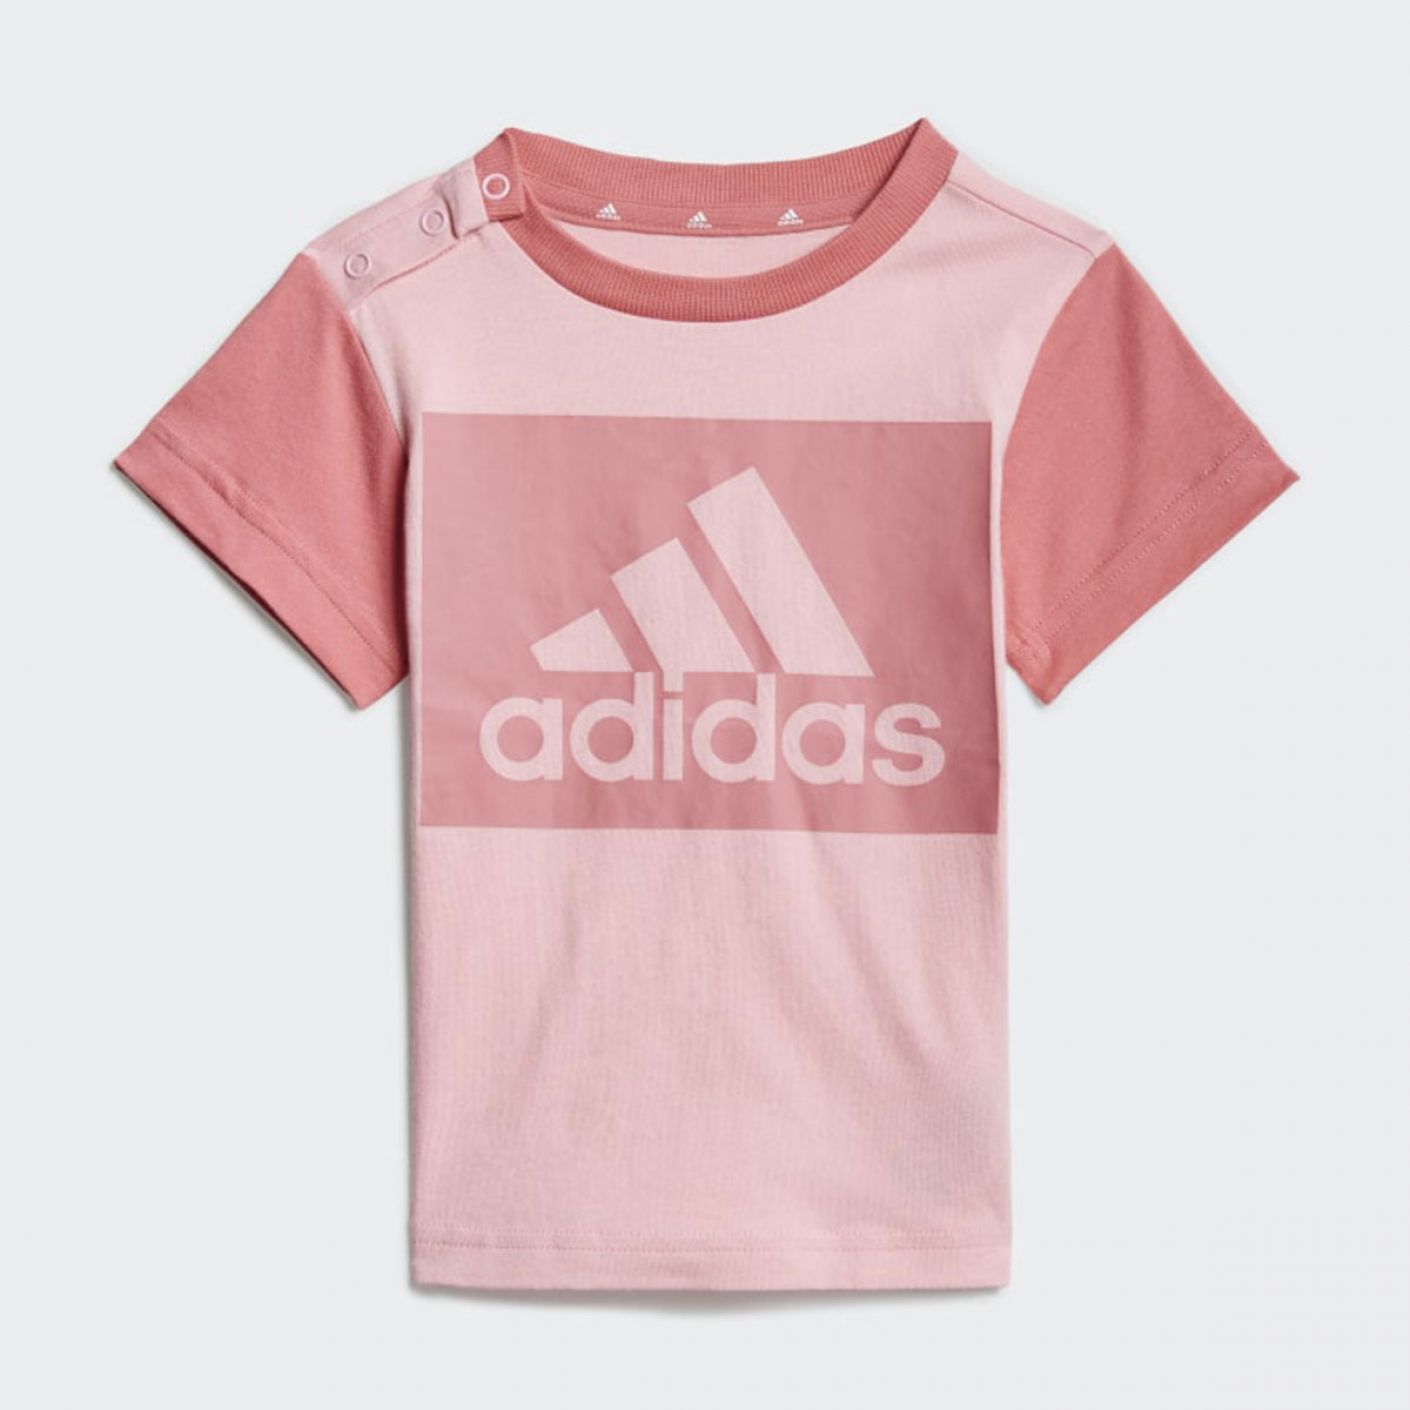 Adidas I Essentials Tee and Shorts Light Pink Rose